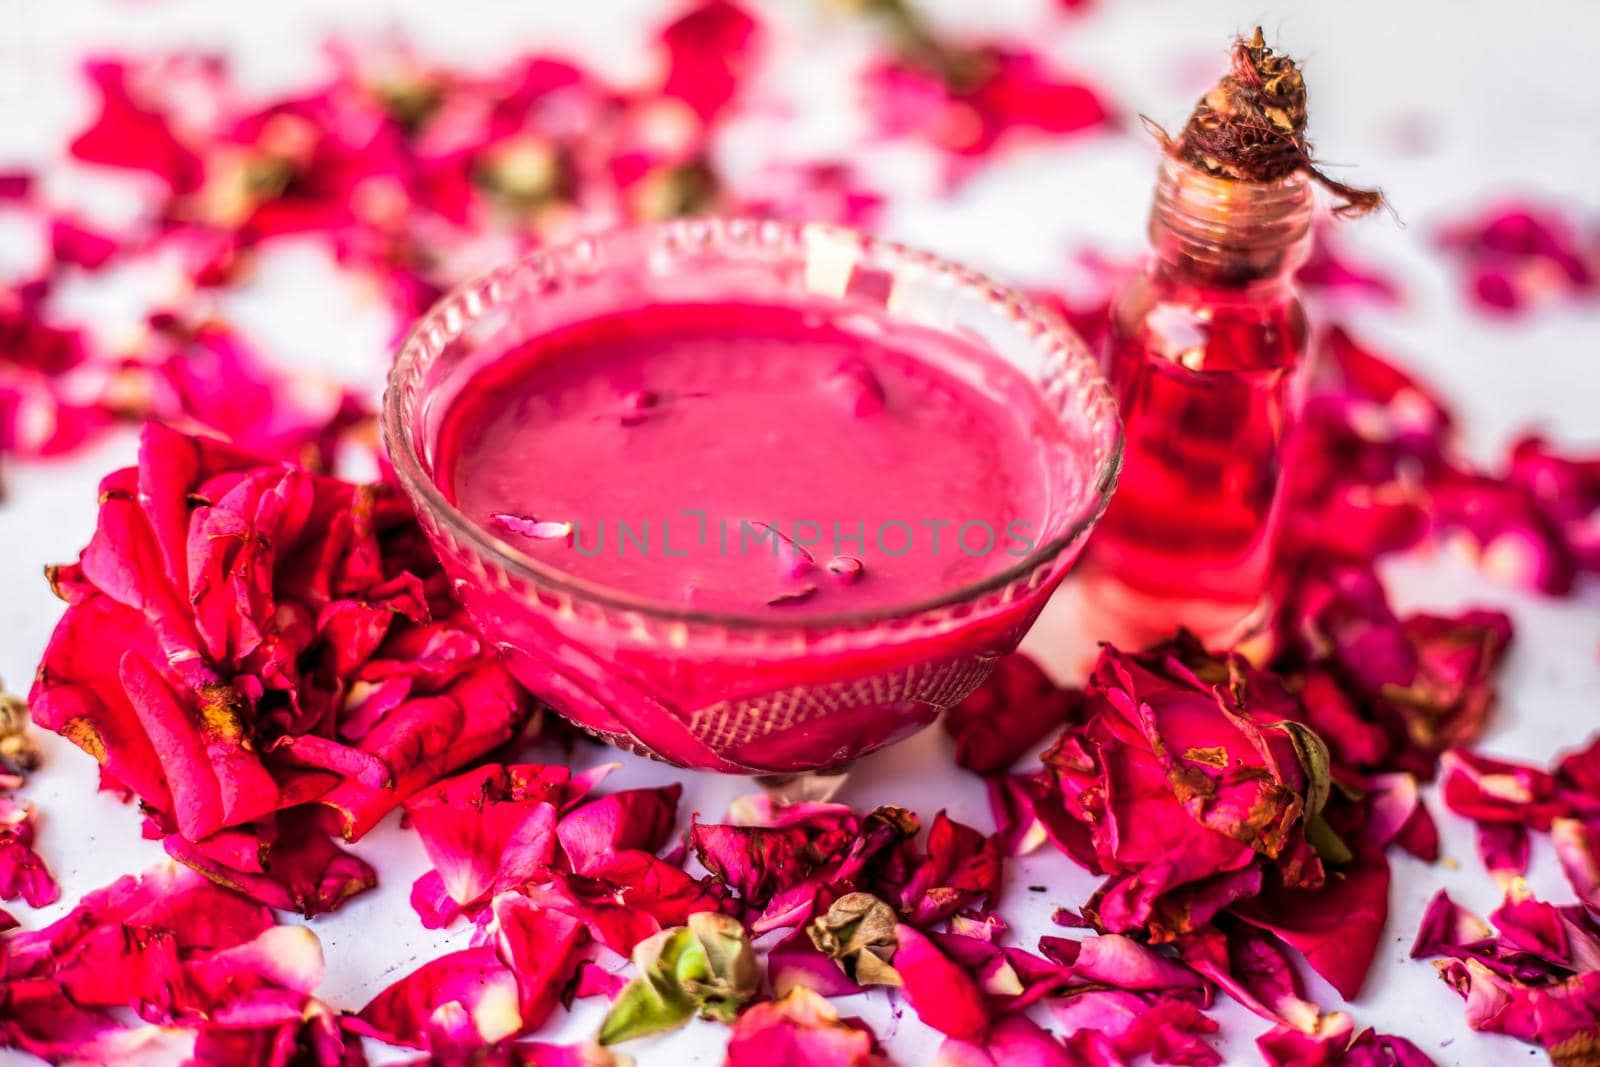 Rose Jam in a glass bowl with some essential oil or concentration of rose in a glass bottle along with some rose petals spread on the surface. by mirzamlk